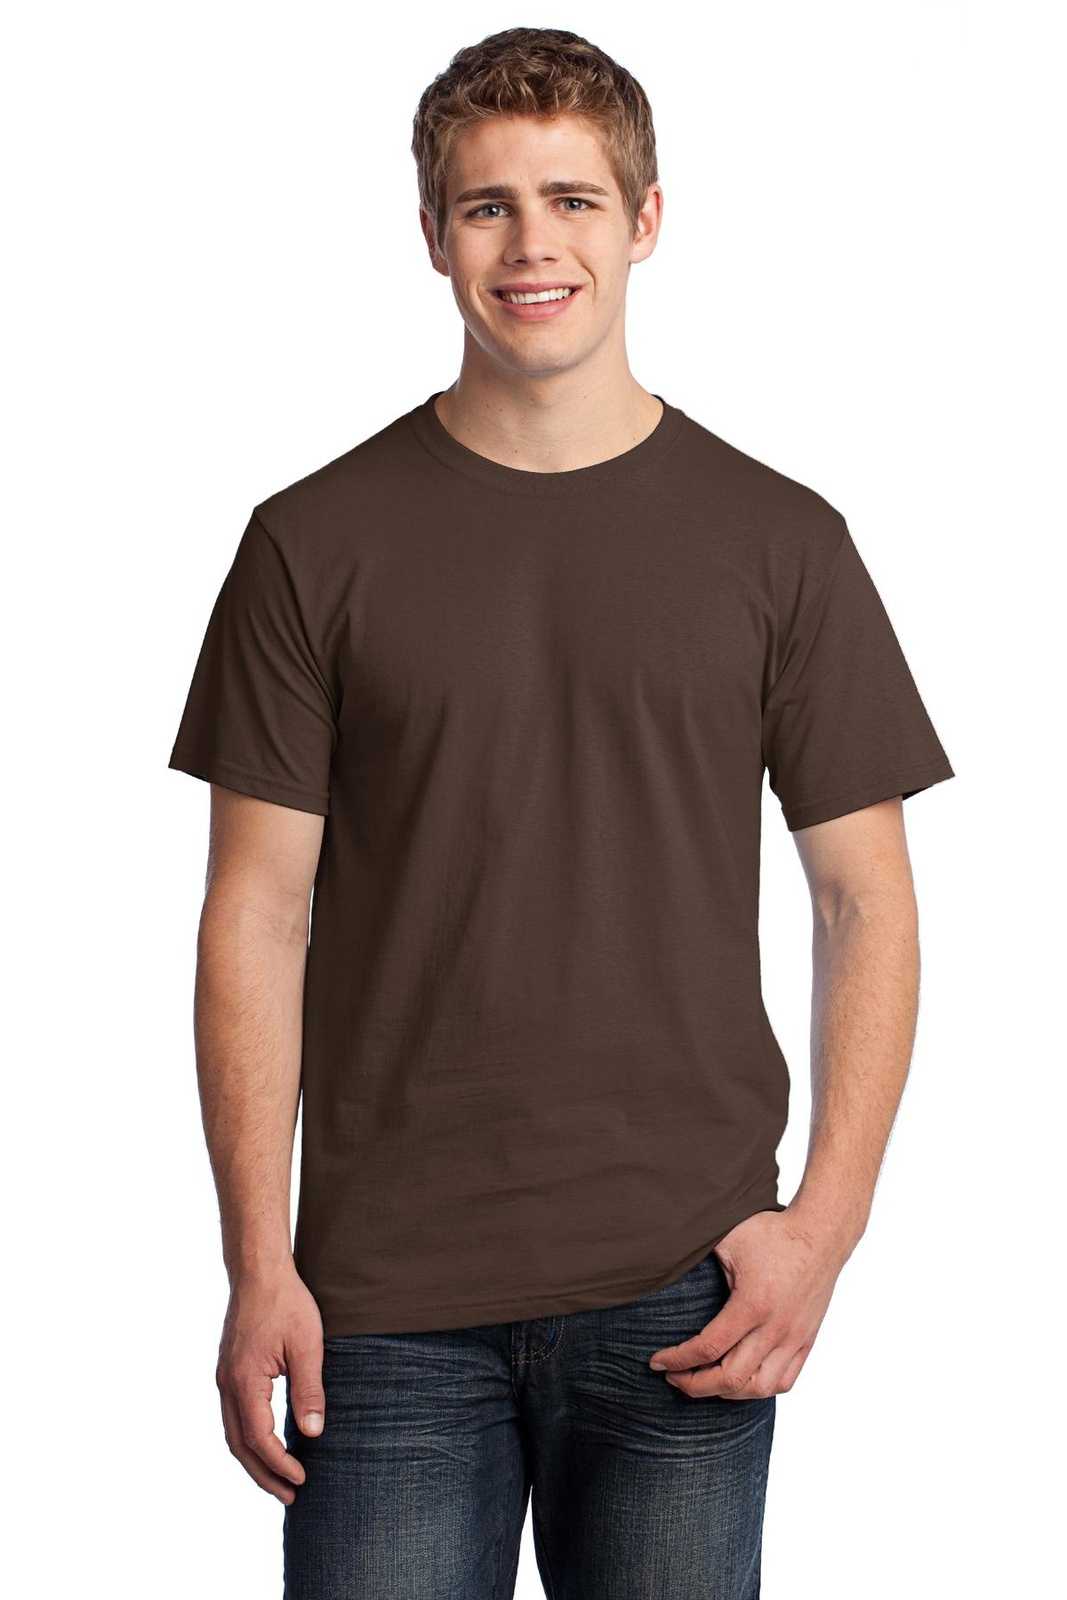 Fruit of the Loom 3930 HD Cotton 100% Cotton T-Shirt - Chocolate - HIT a Double